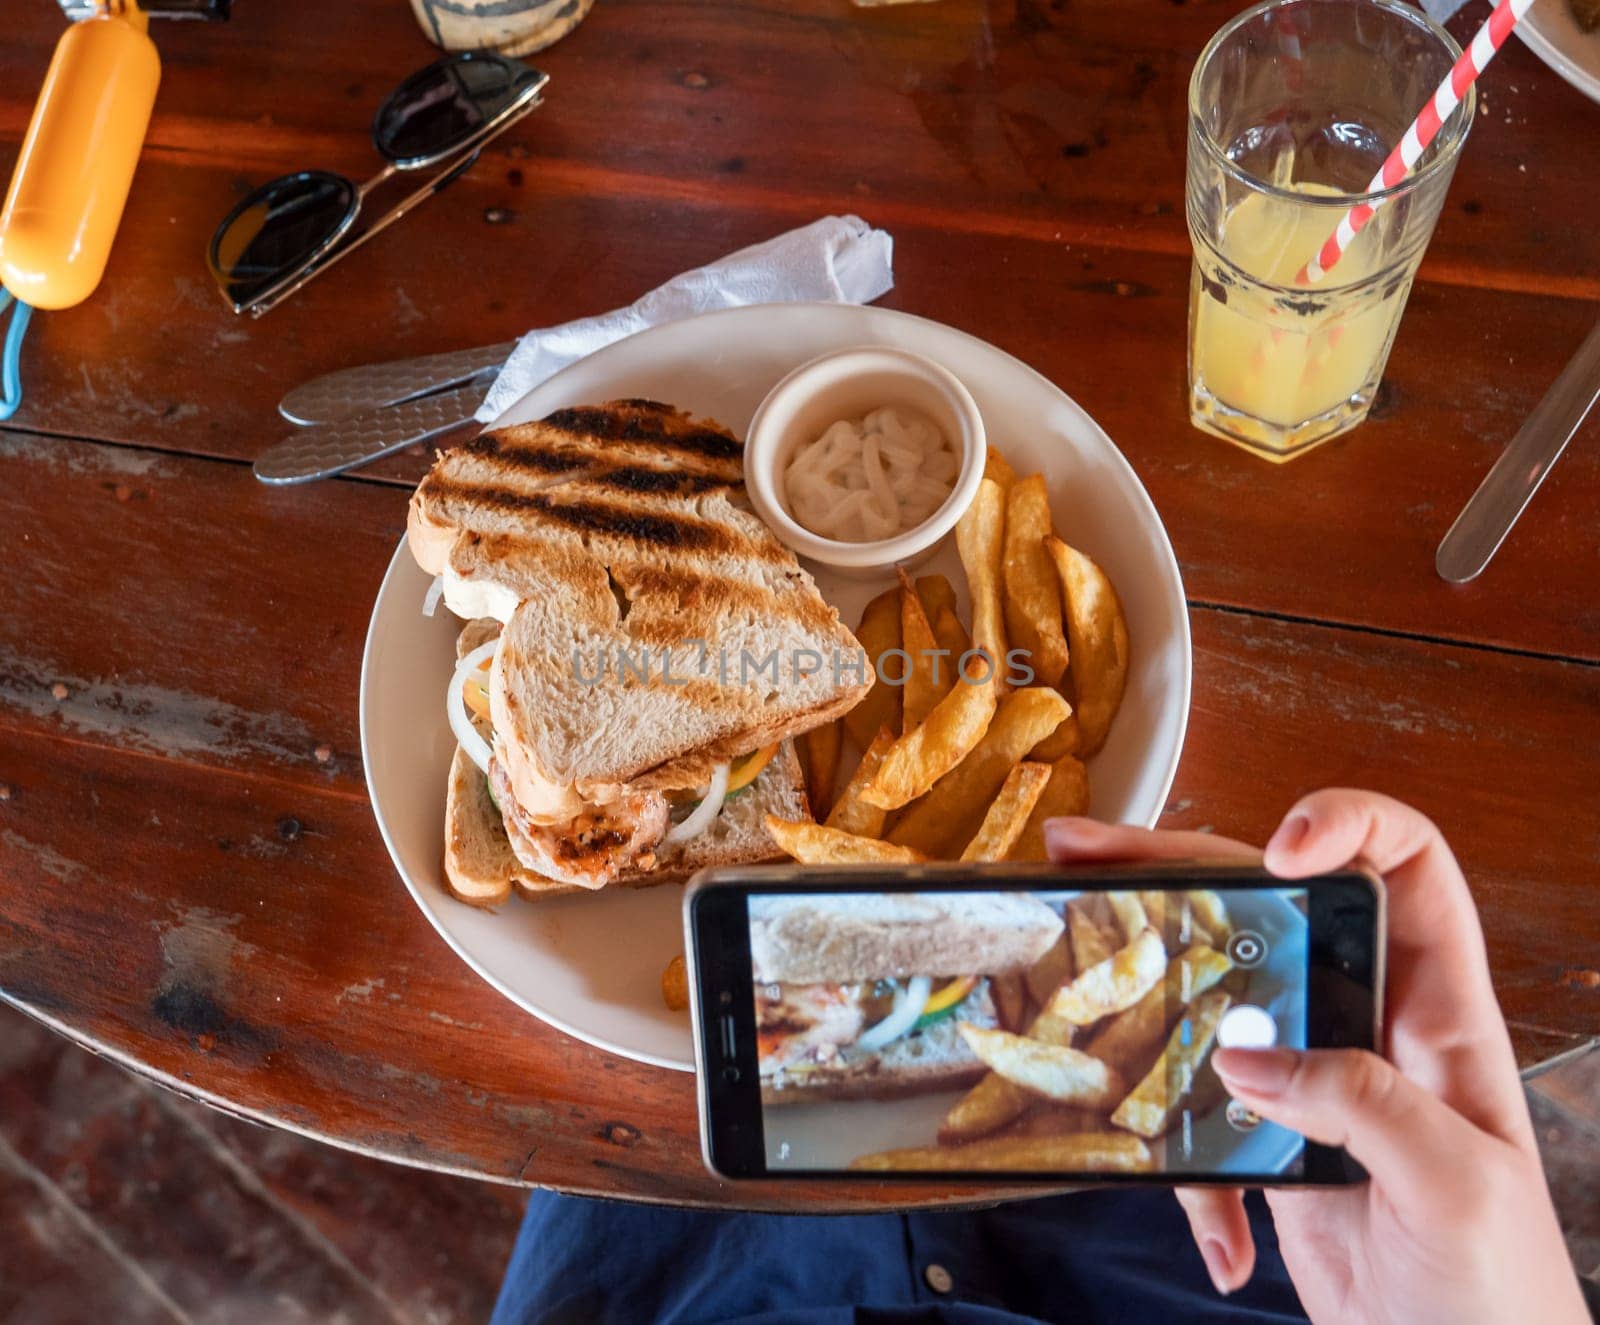 Capturing a delicious sandwich and fries at an outdoor cafe during daytime by Busker